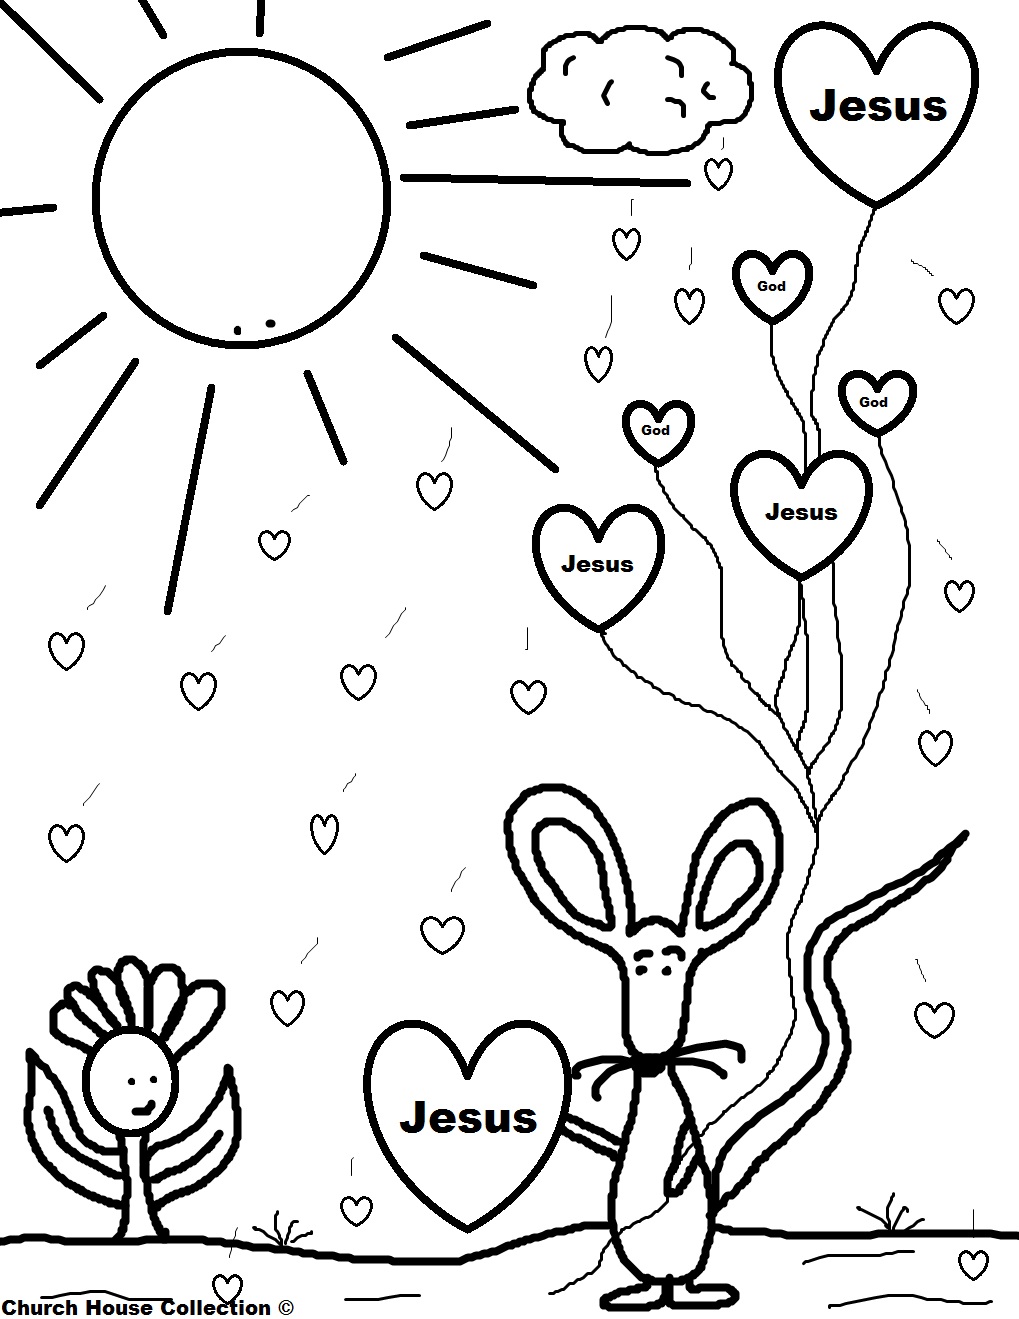 church house collection blog valentine mouse holding jesus rh churchhousecollection Heart Coloring Pages Printable Heart Coloring Pages